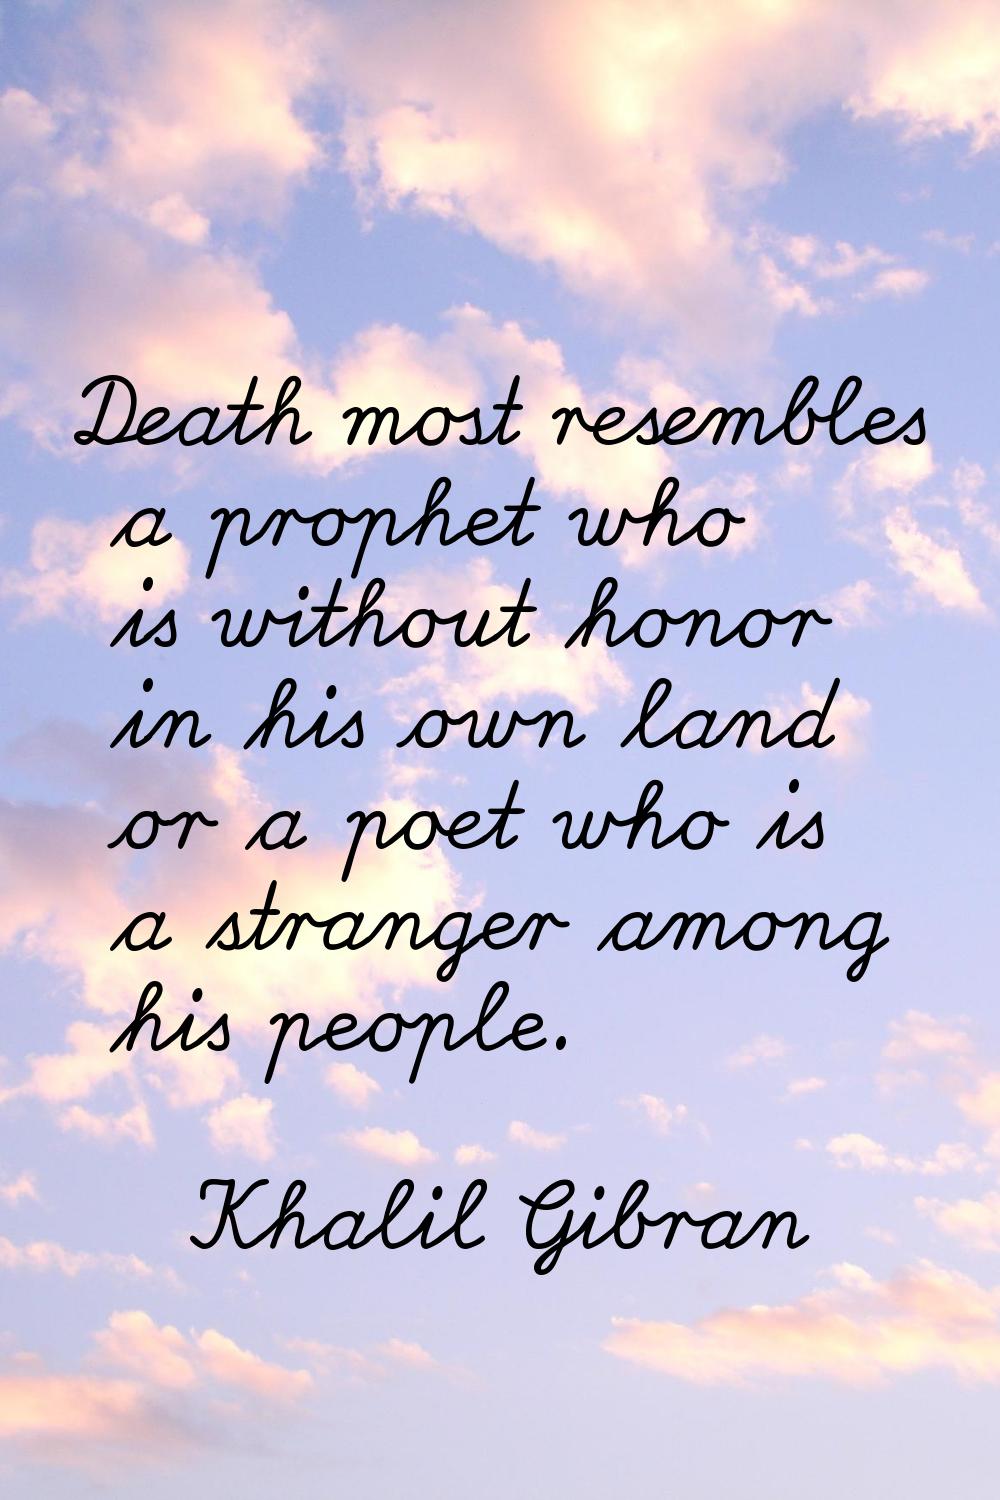 Death most resembles a prophet who is without honor in his own land or a poet who is a stranger amo